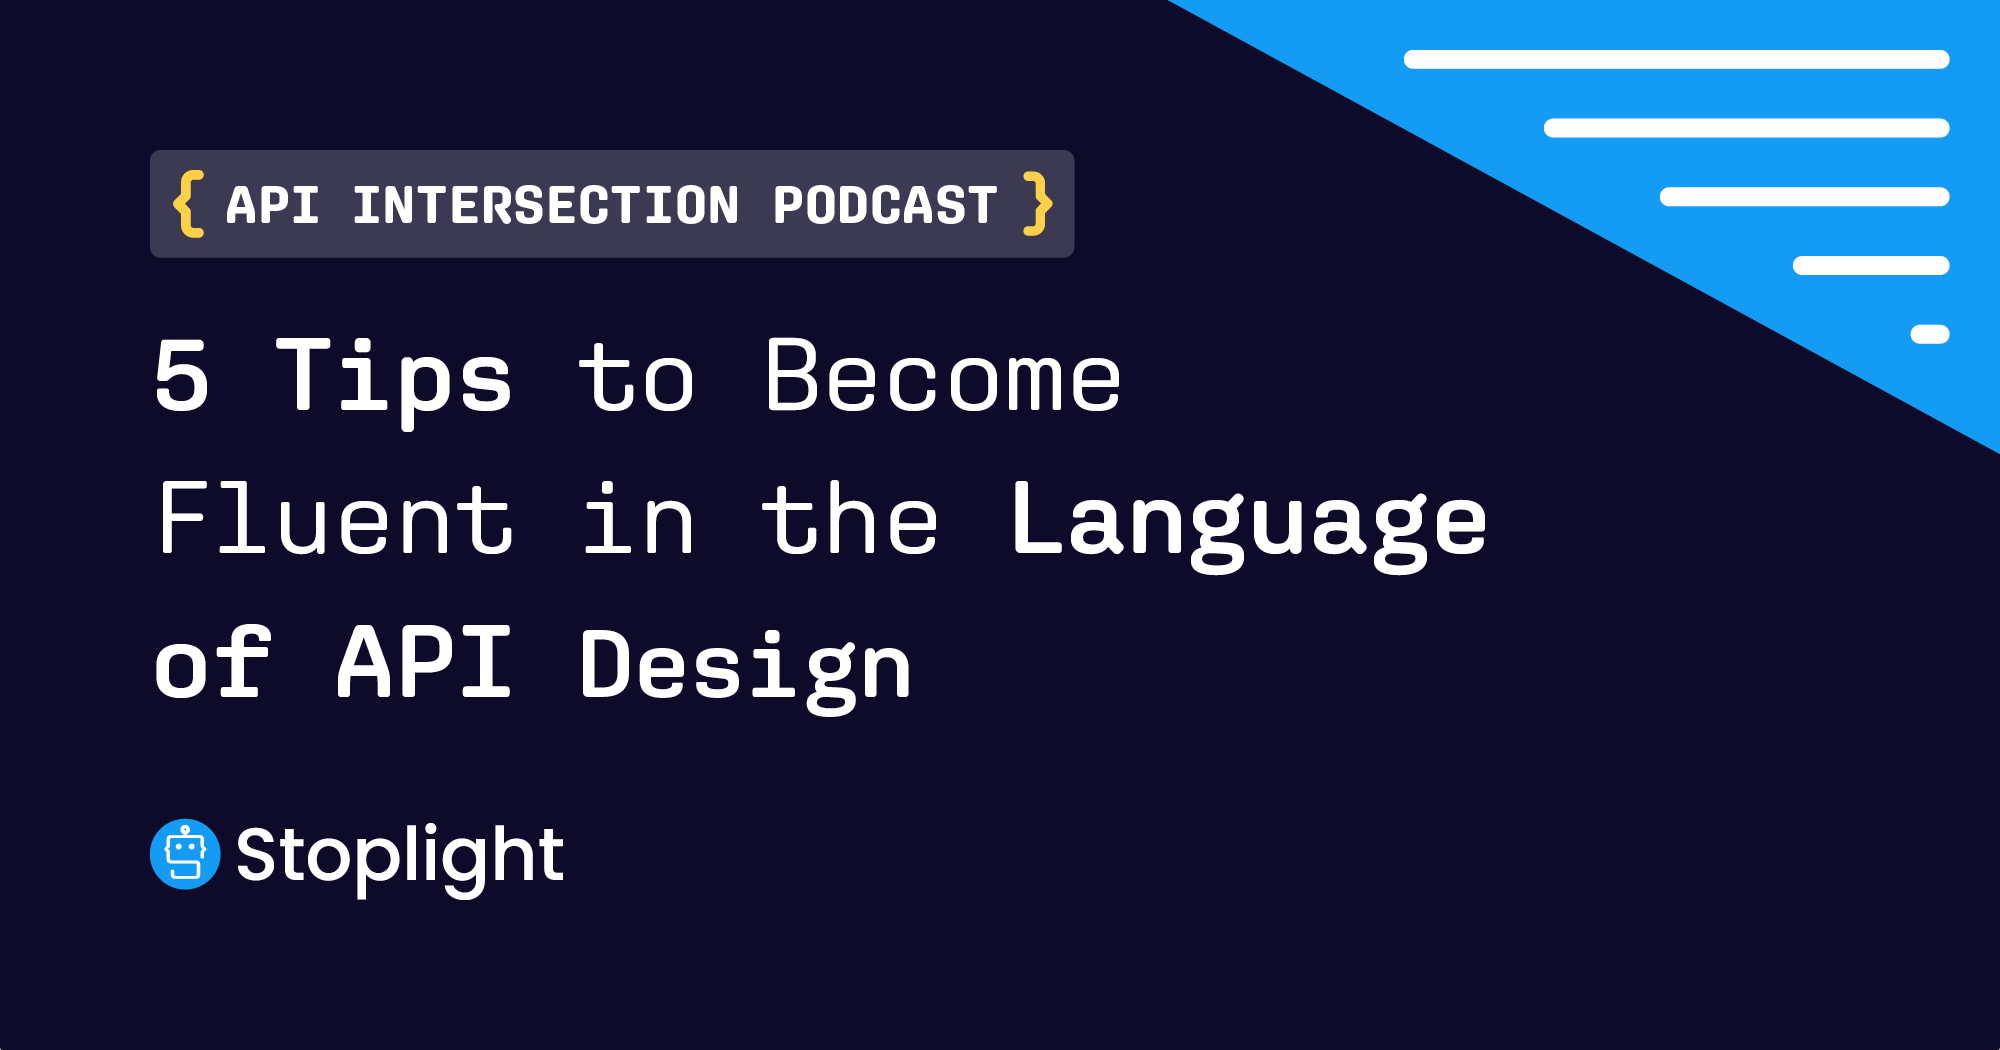 5 Tips to Become Fluent in the Language of API Design